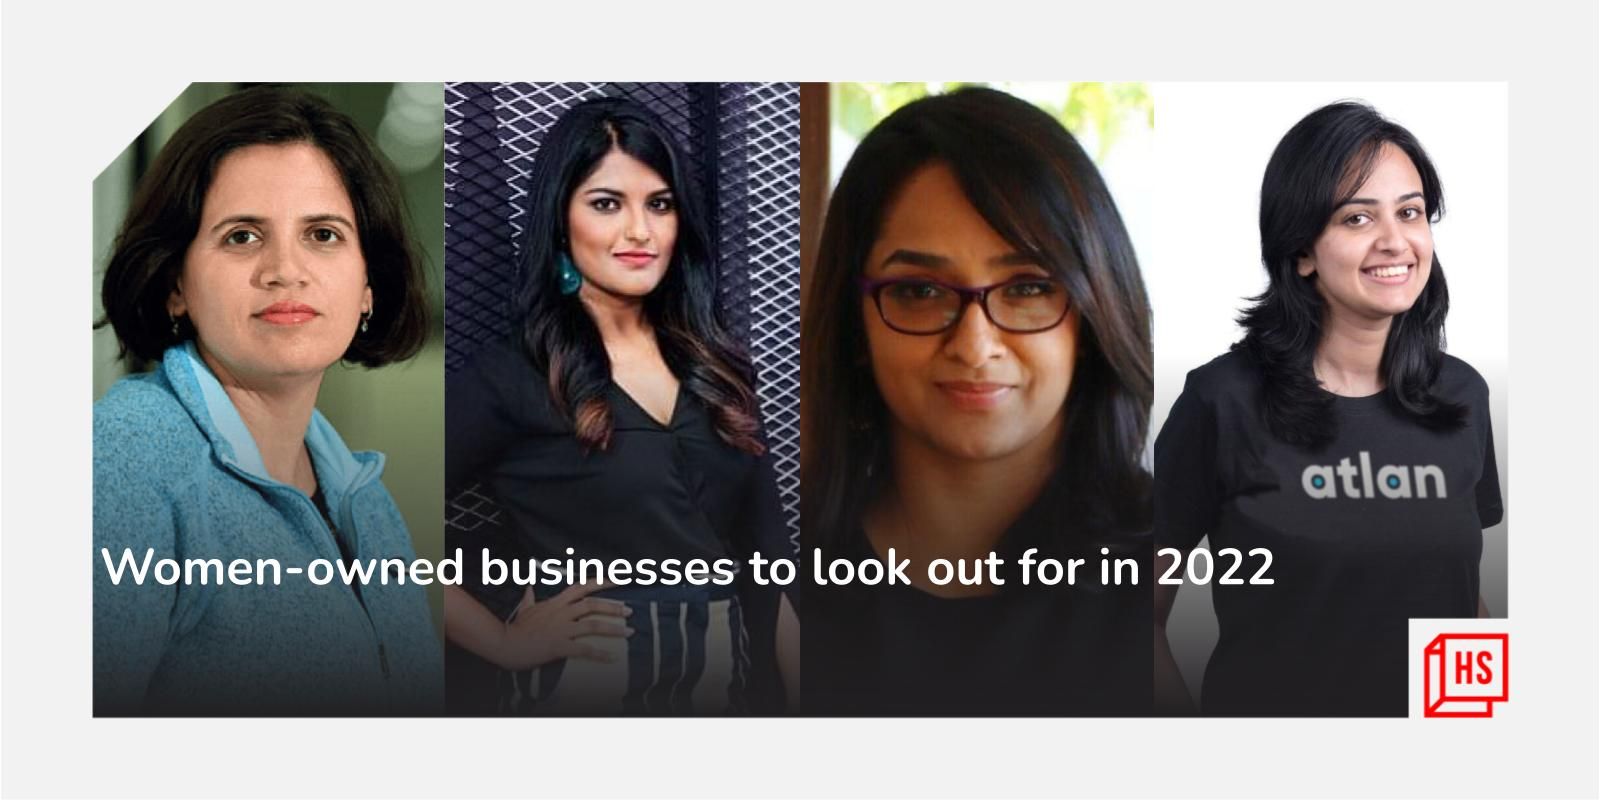 Here are 7 women-owned businesses to look out for in 2022